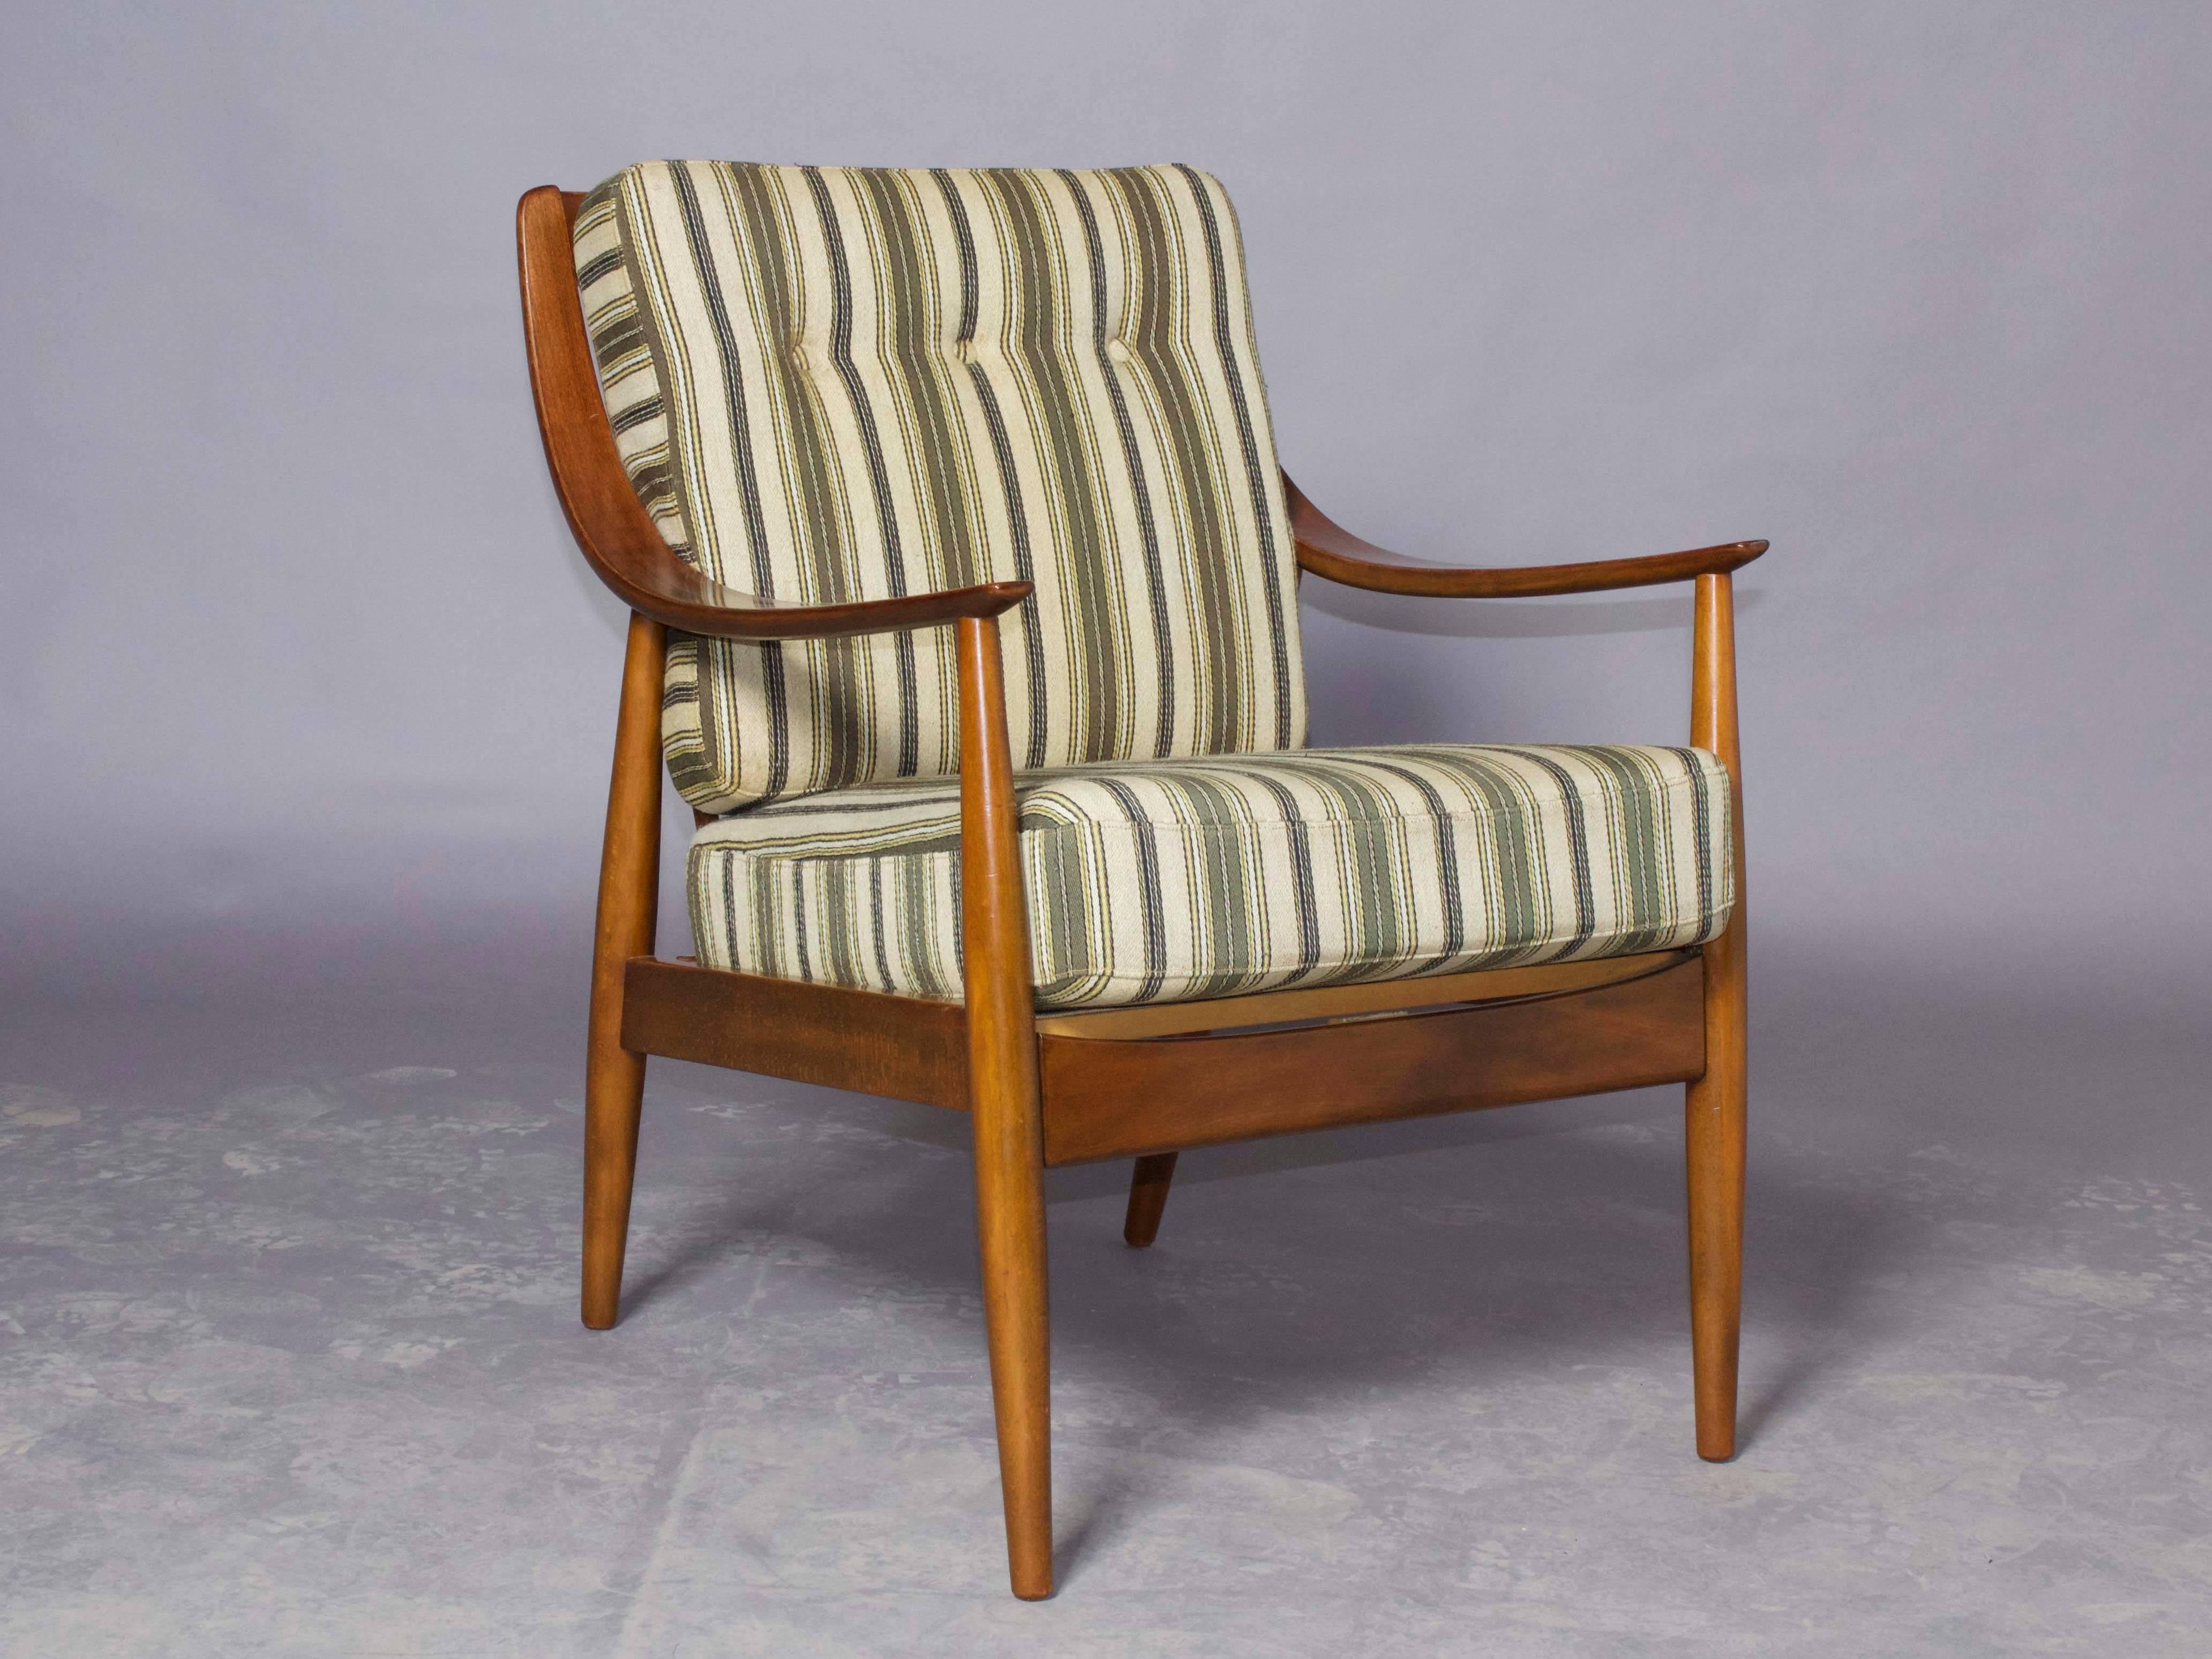 Oiled Hvidt and Molgaard Armchair Model FD-146 in Mahogany For Sale